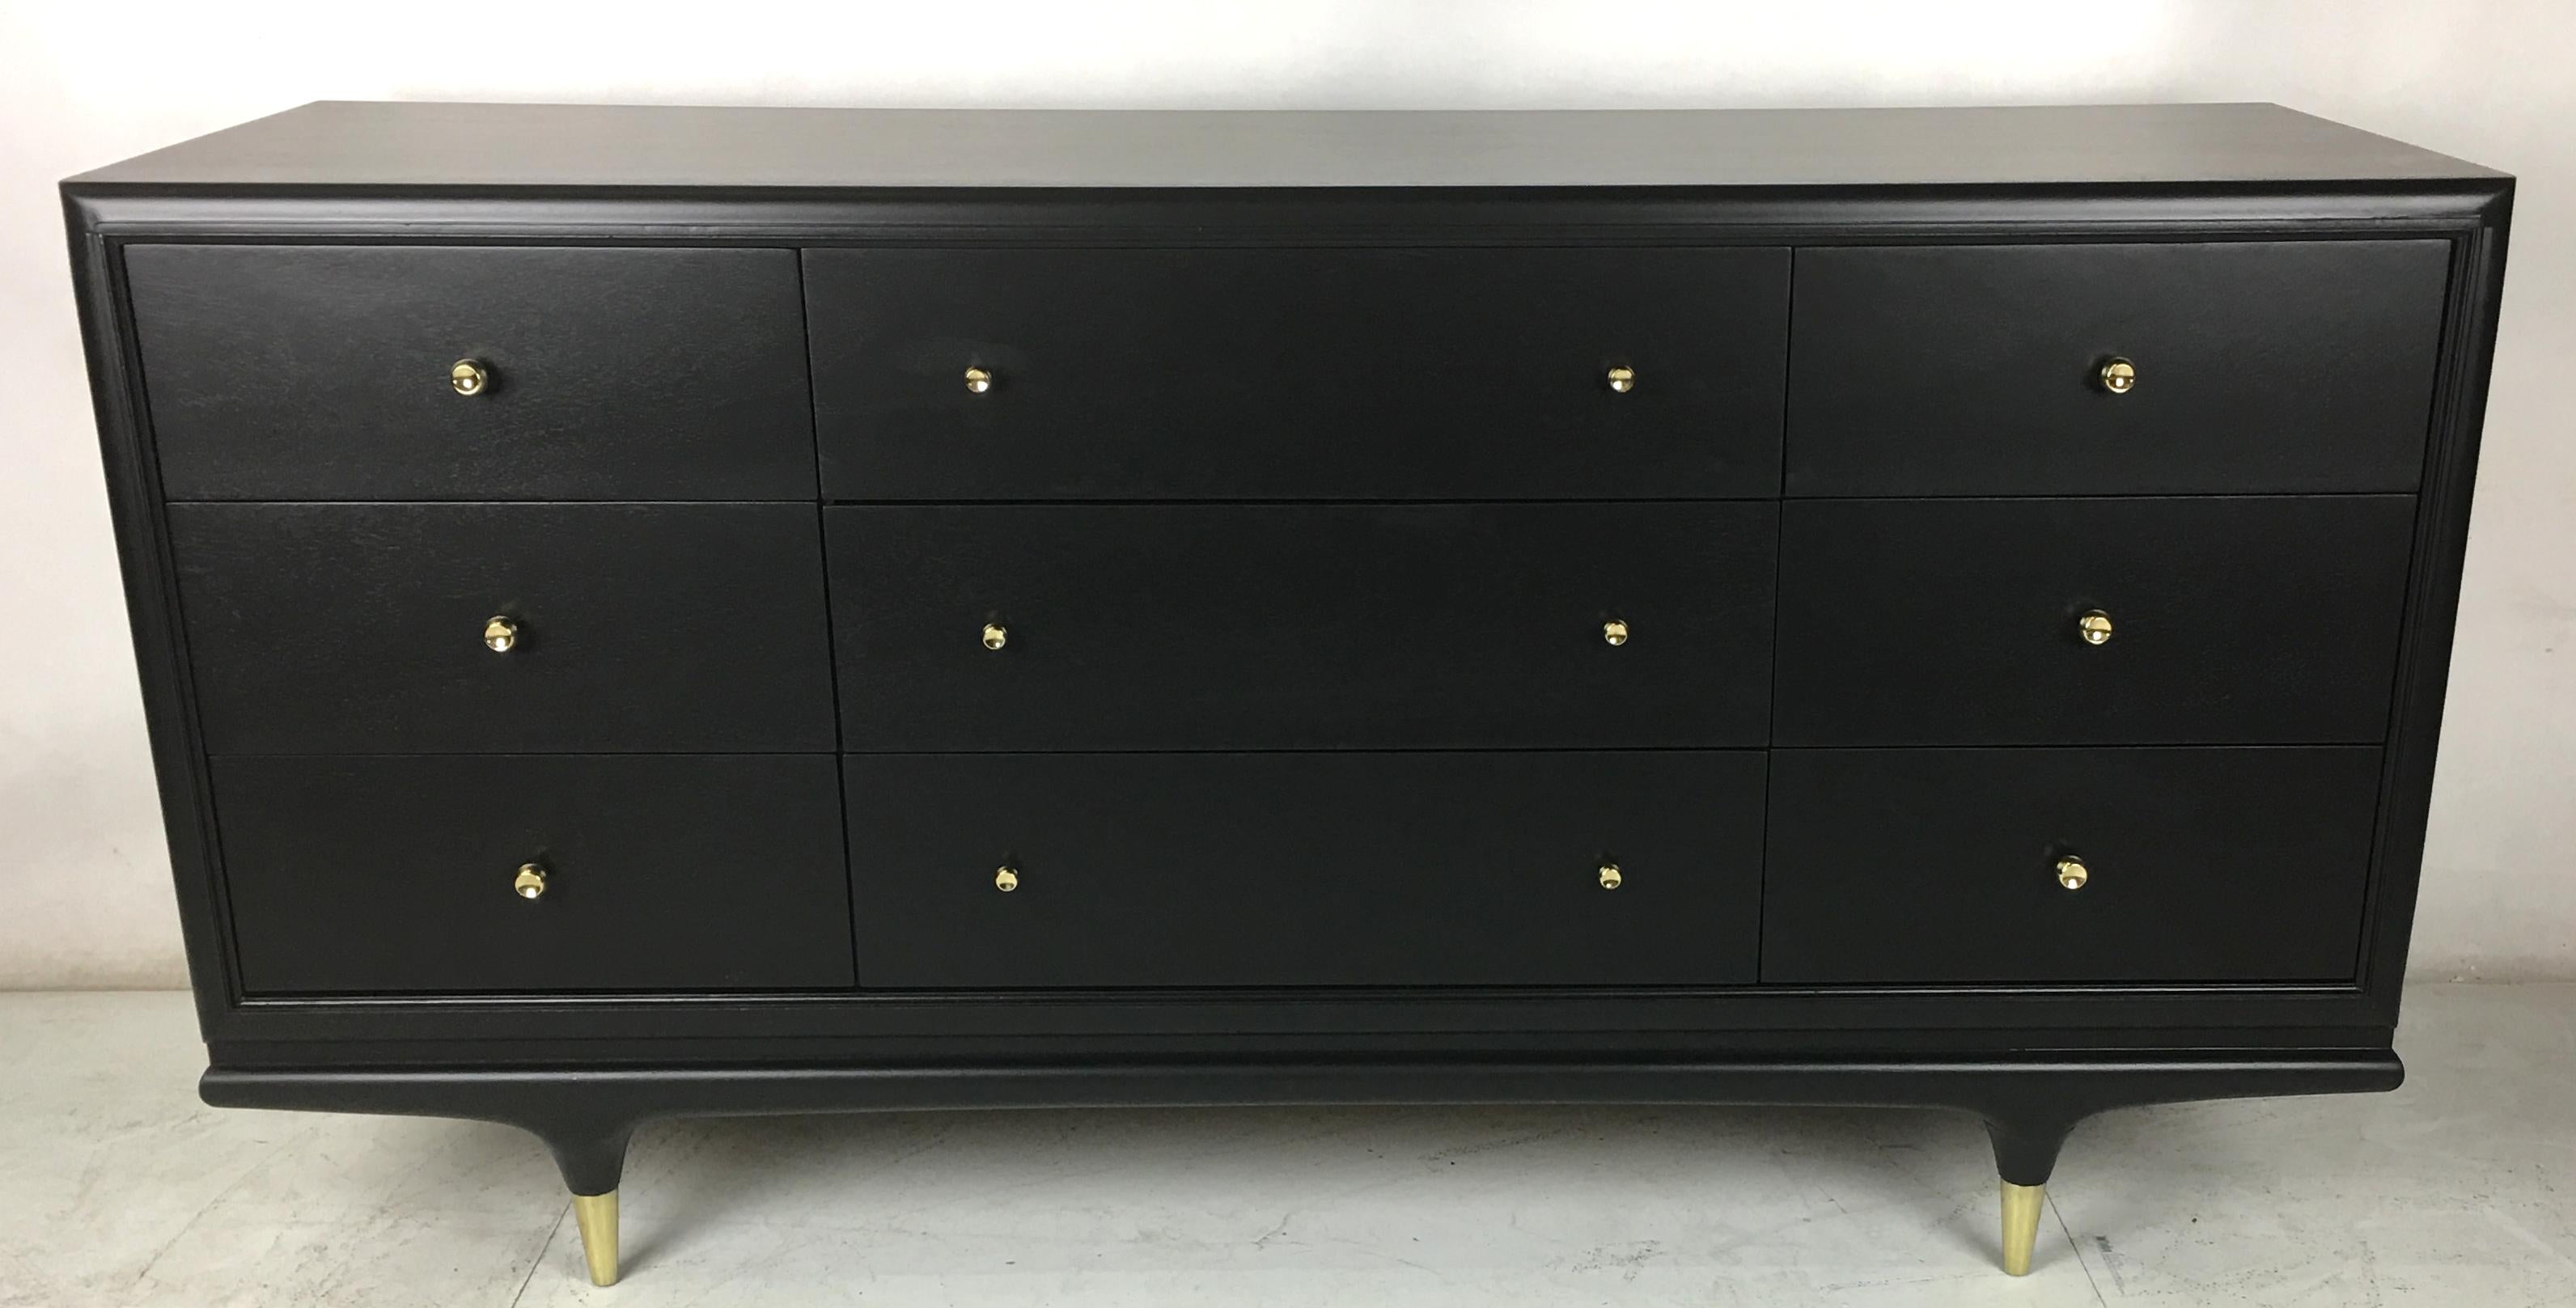 Beautiful Italian style walnut dresser with brass hardware refinished in natural open grain black lacquer. The stiletto legs have tall polished brass sabots and all of the brass elements have been professionally polished and lacquered. Meticulously